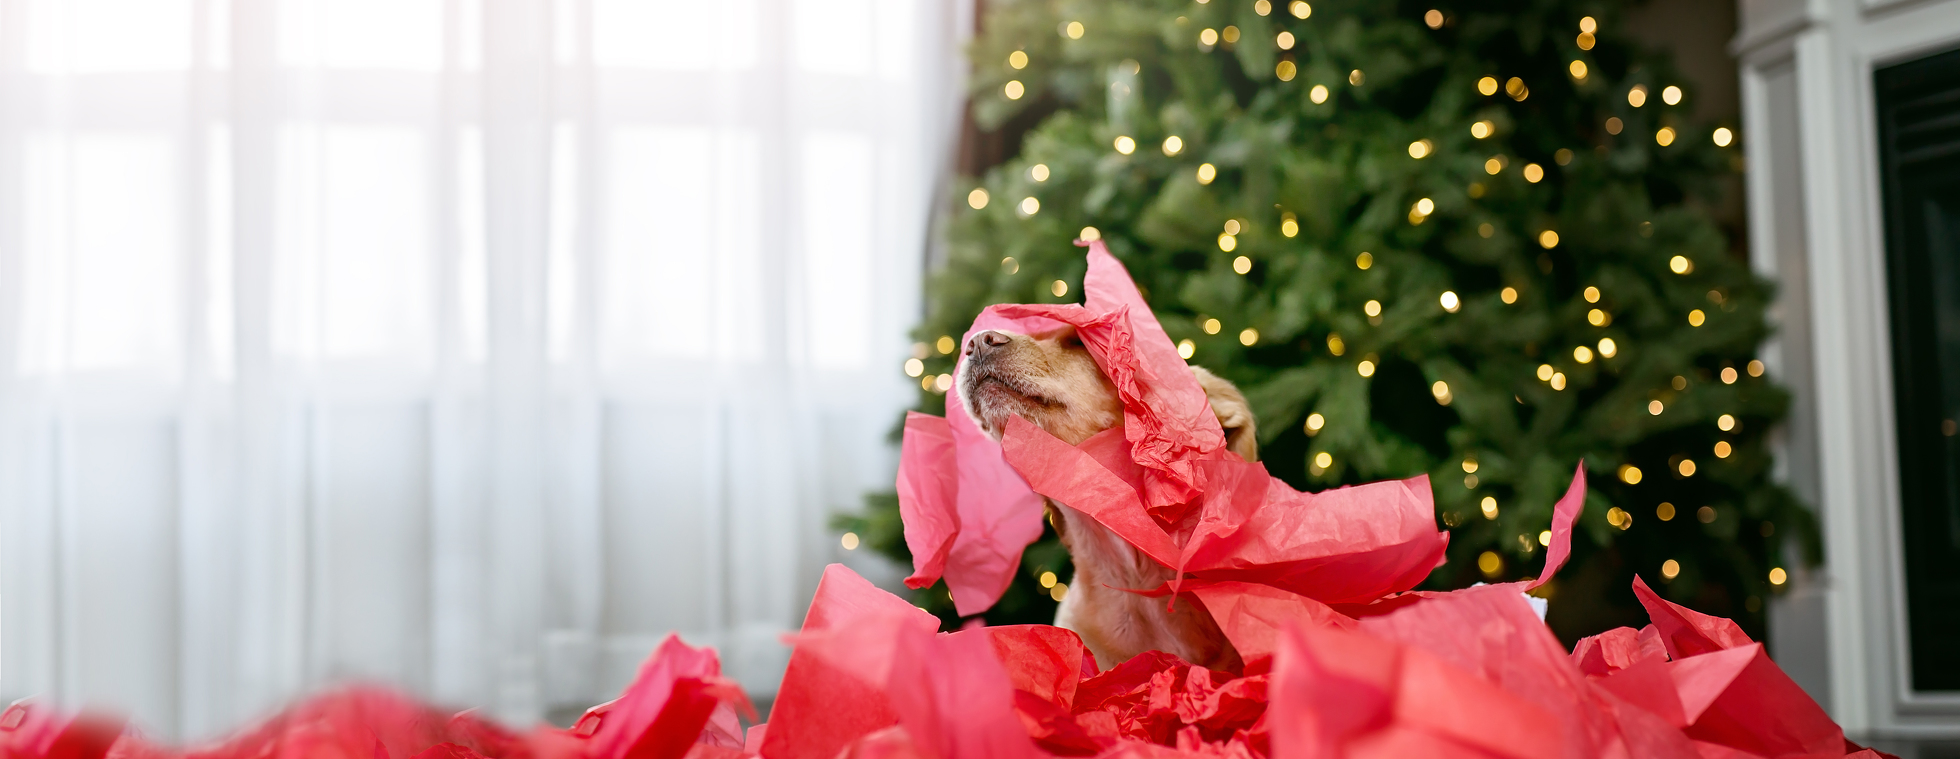 2018 PAW-liday Gift Guide